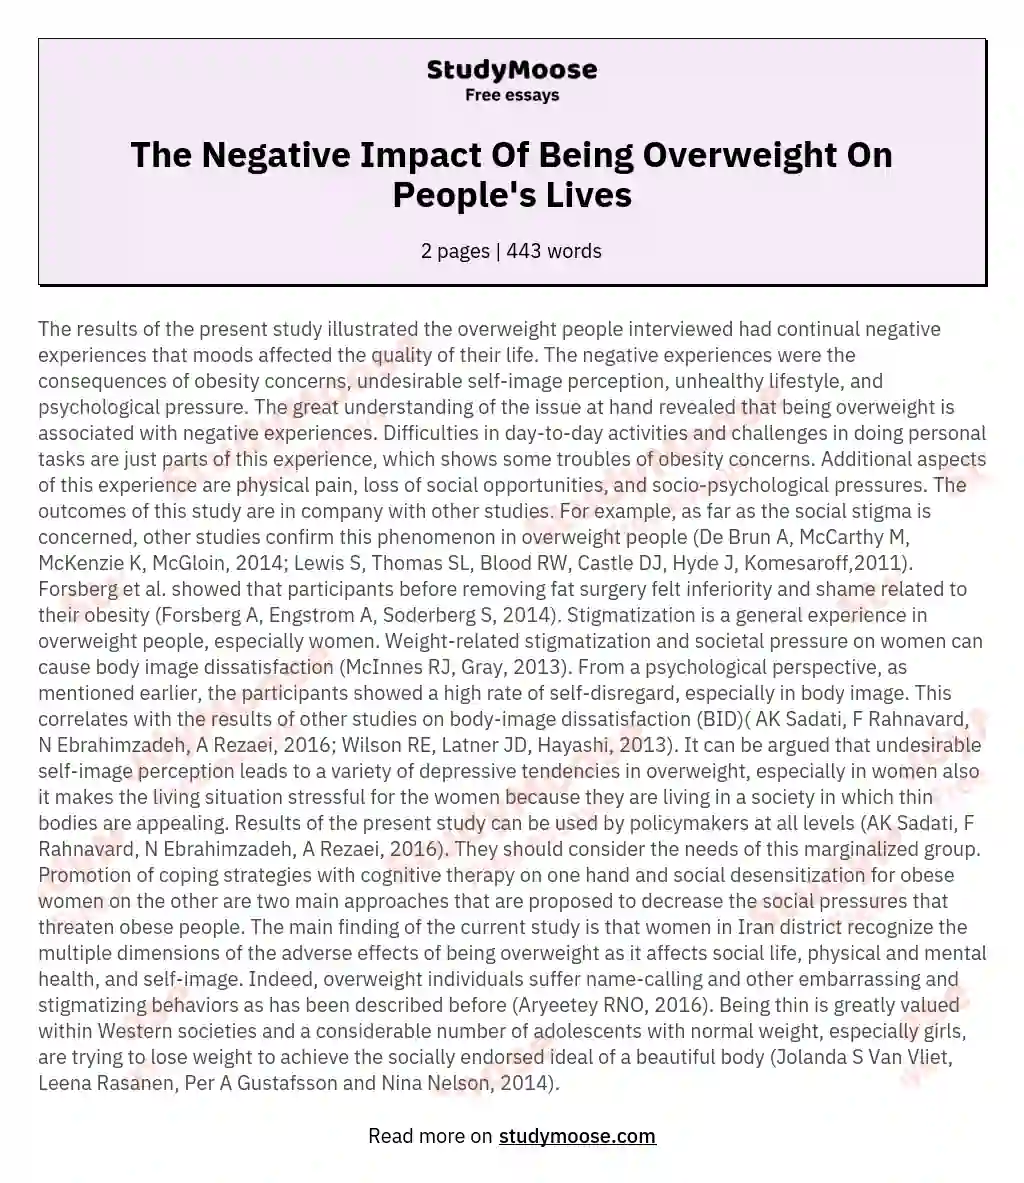 The Negative Impact Of Being Overweight On People's Lives essay